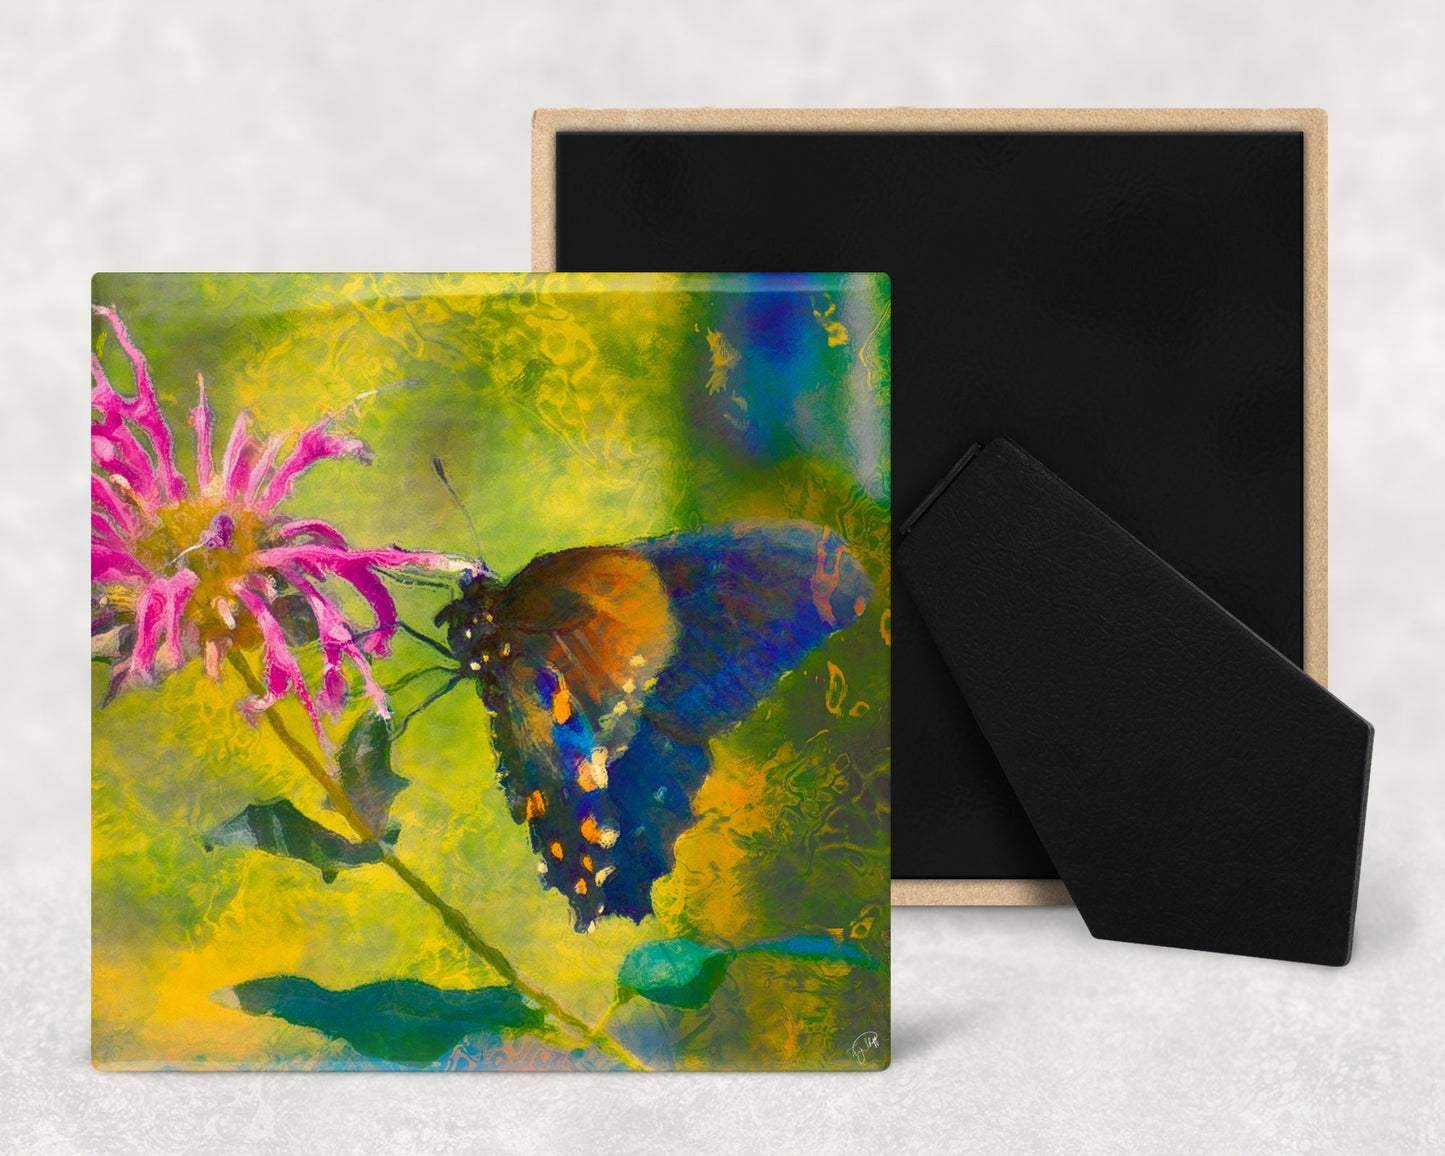 Painted Look Butterfly Art Decorative Ceramic Tile with Optional Easel Back - Available in 3 Sizes